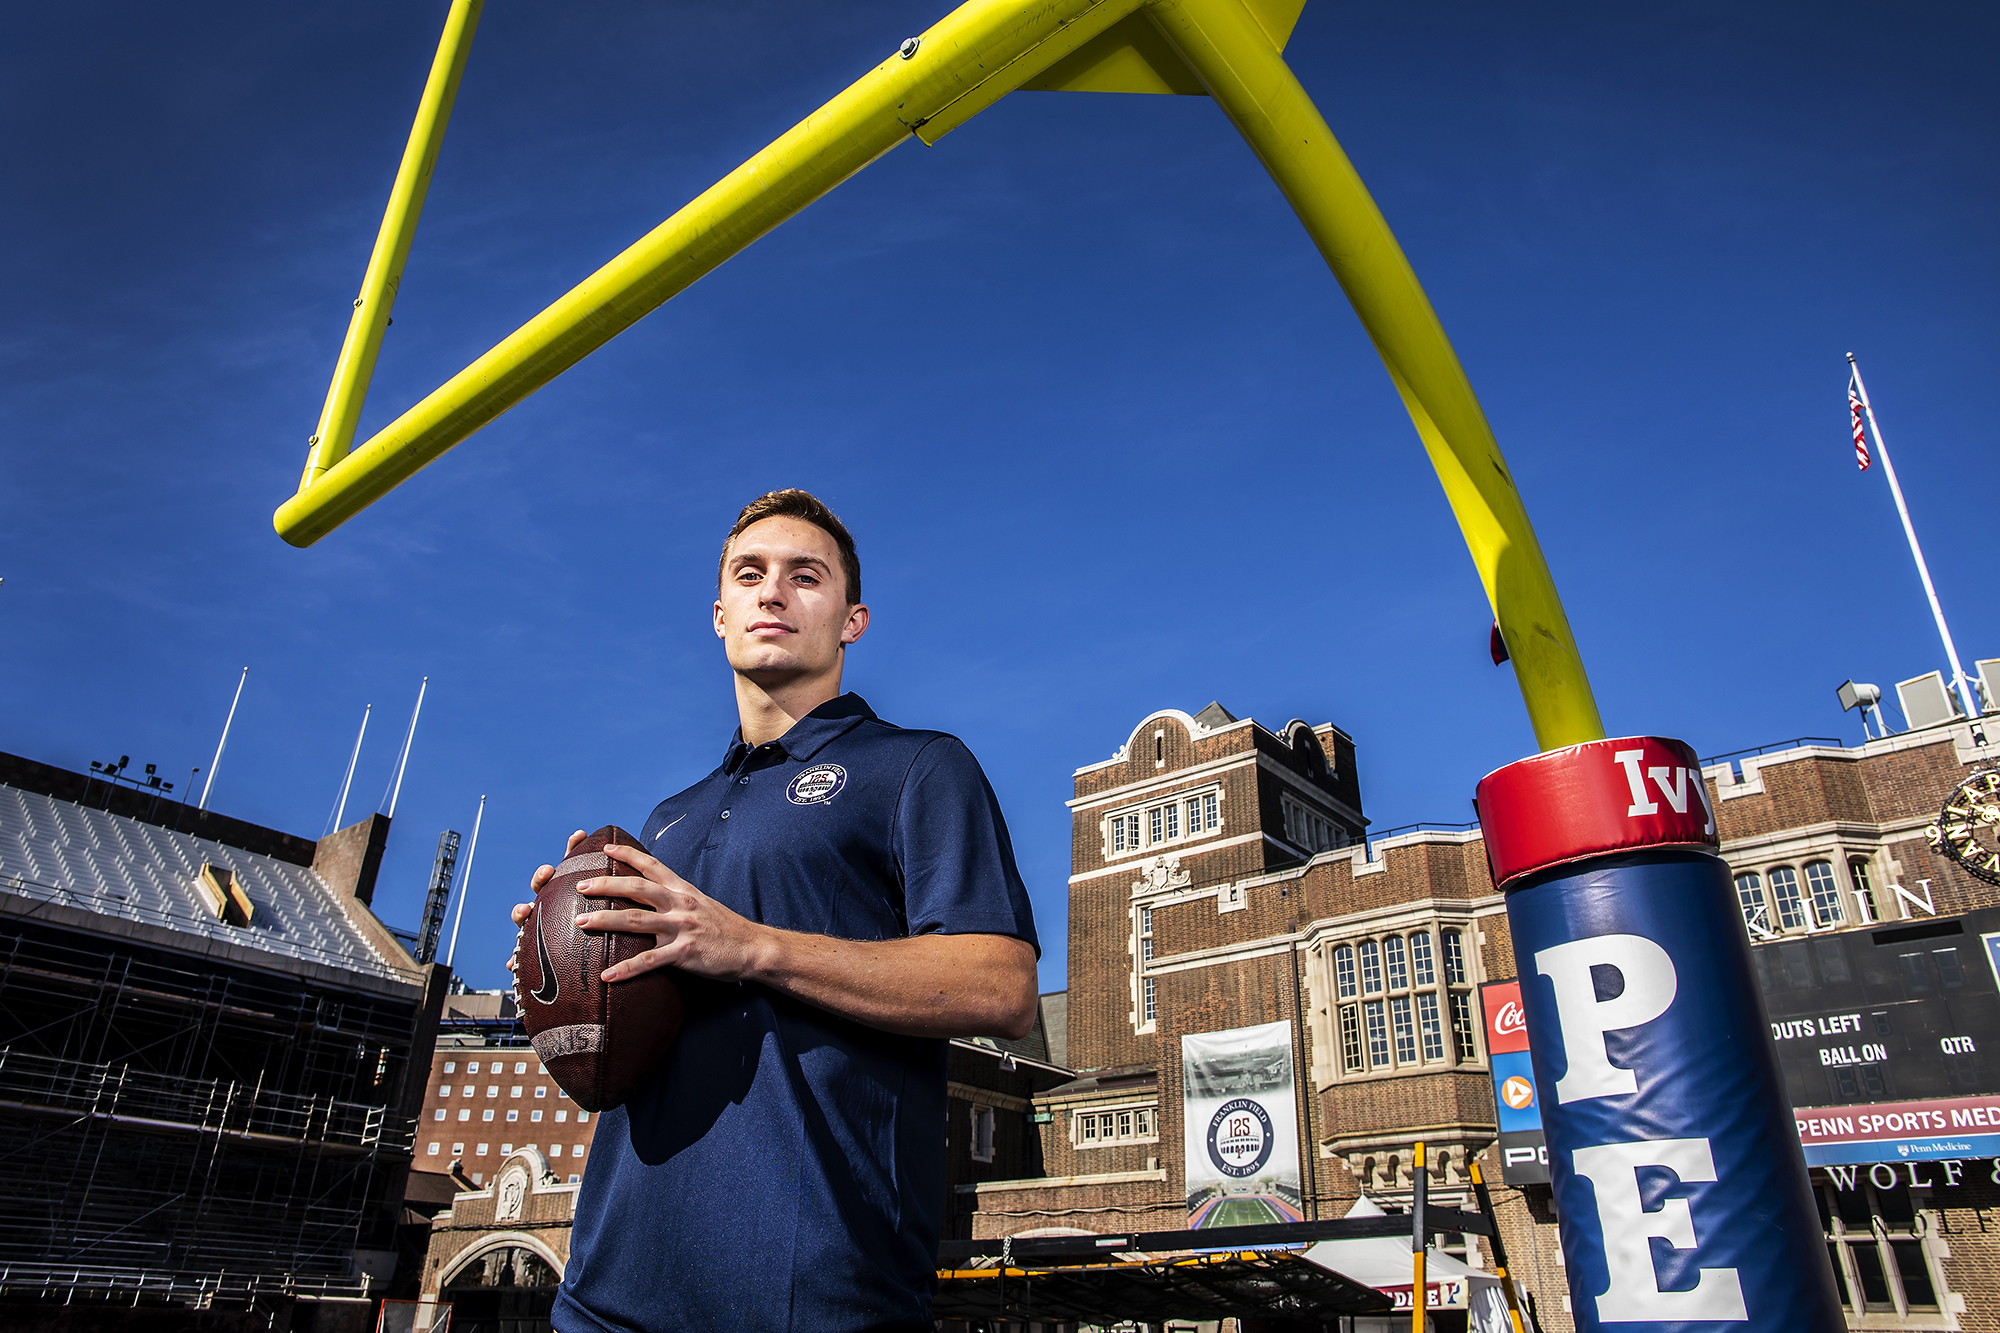 Eddie Jenkins of the sprint football team poses with a football in the end zone at Franklin Field.